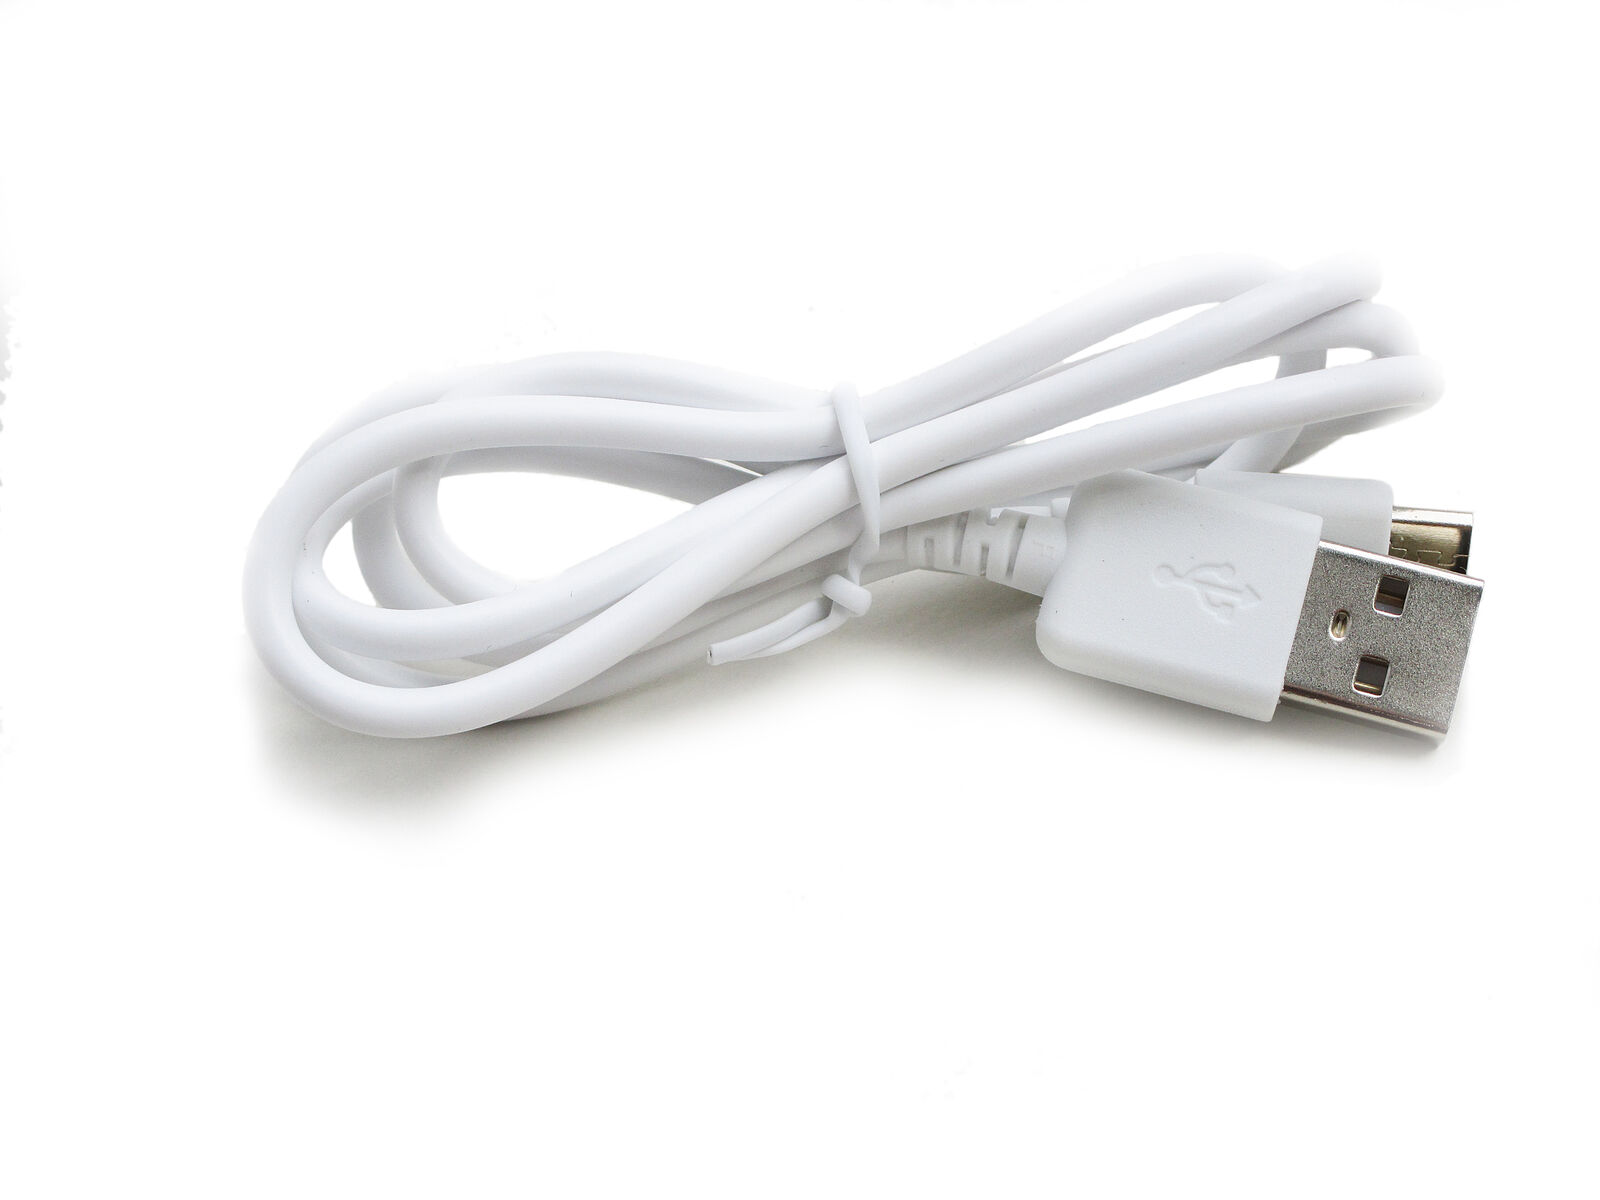 90cm USB Data Charger White Cable 4 Huawei Honor Play 4X Cherry Che2-UL00  Phone | eBay